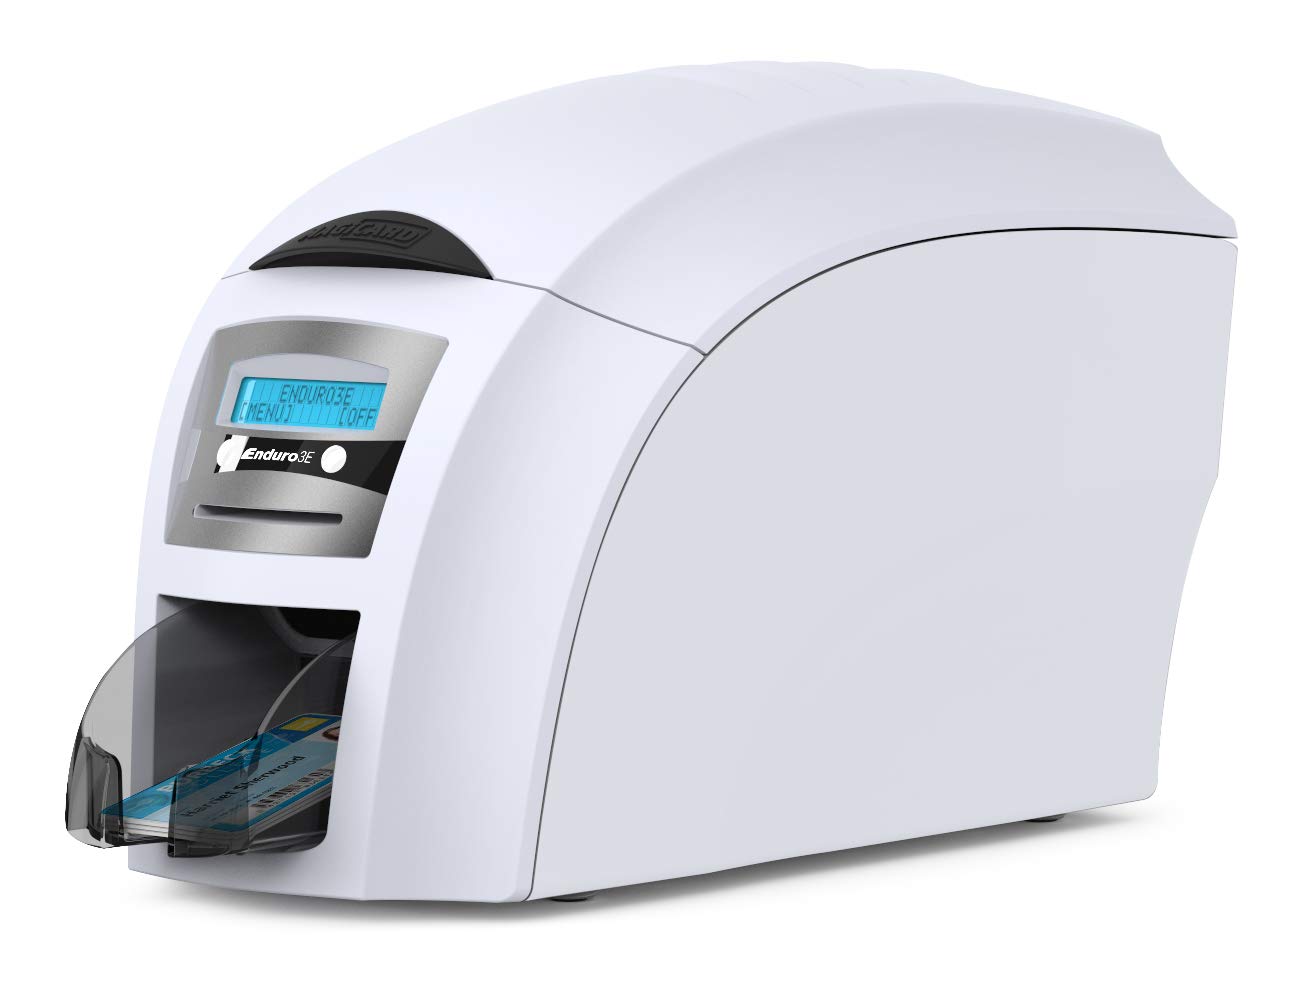 Buy ID Card Printer Laser online at best rates in India